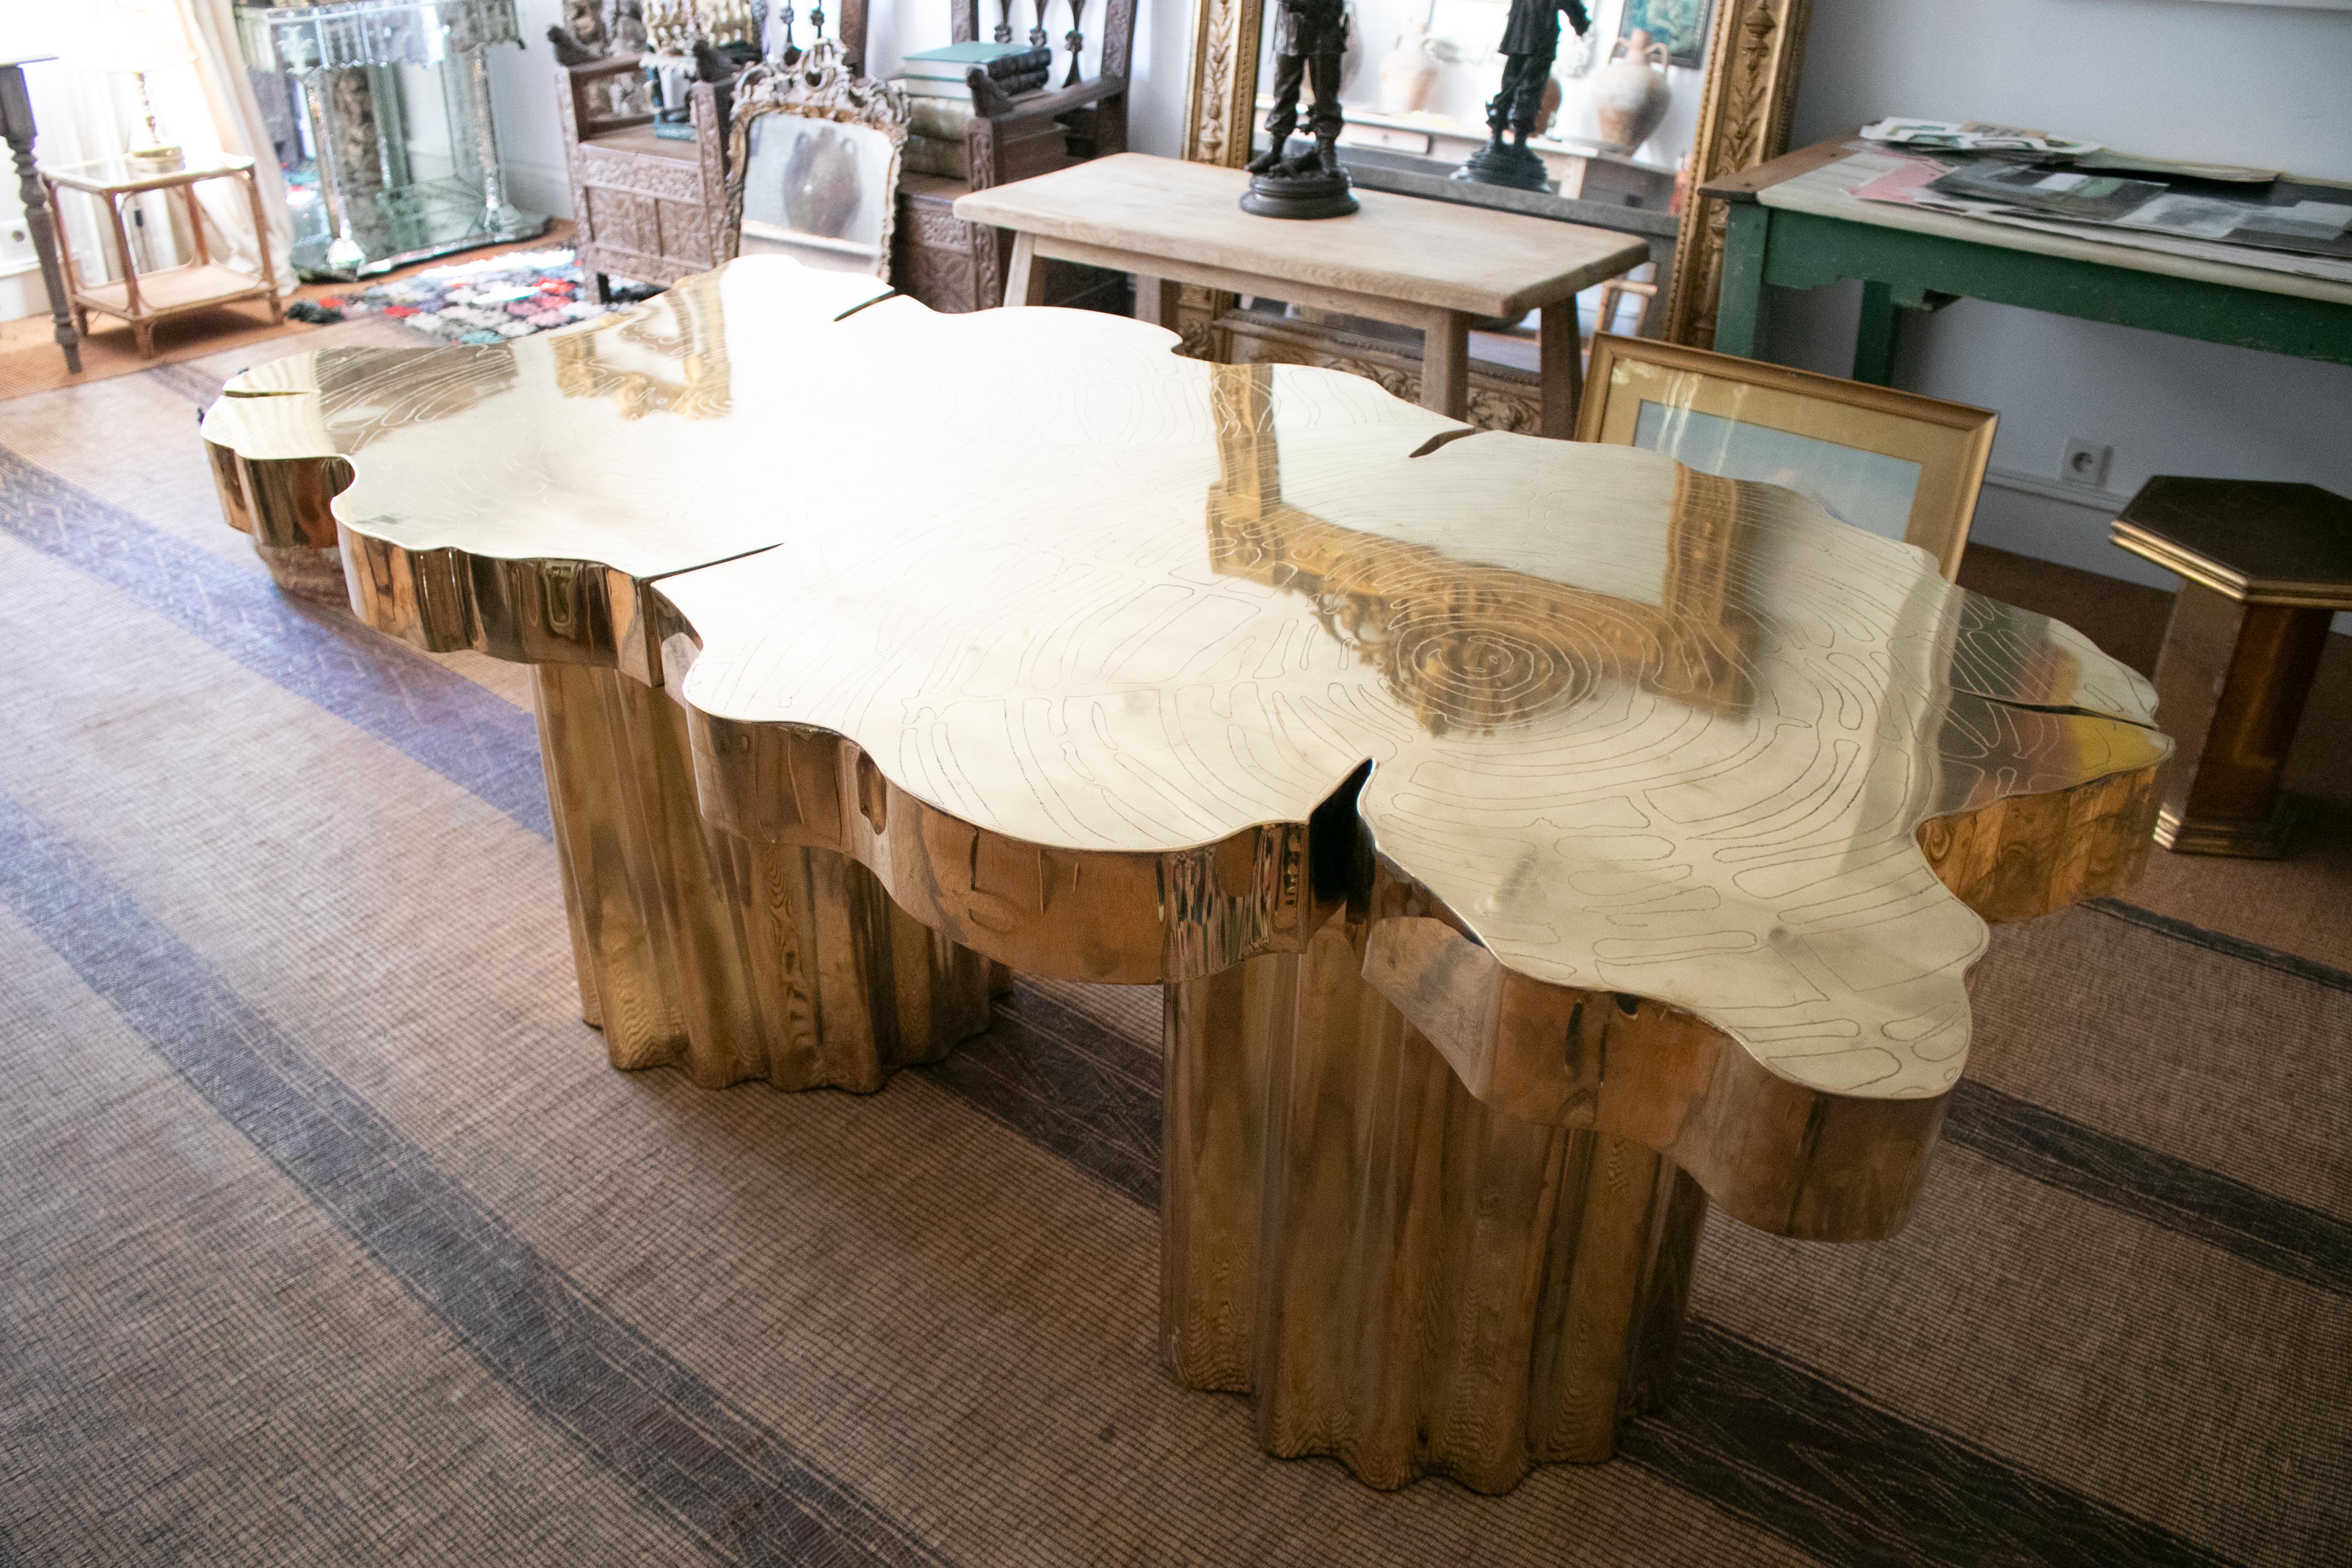 French handmade dining table made of bronze, the top is worked imitating a tree trunk, with two legs.